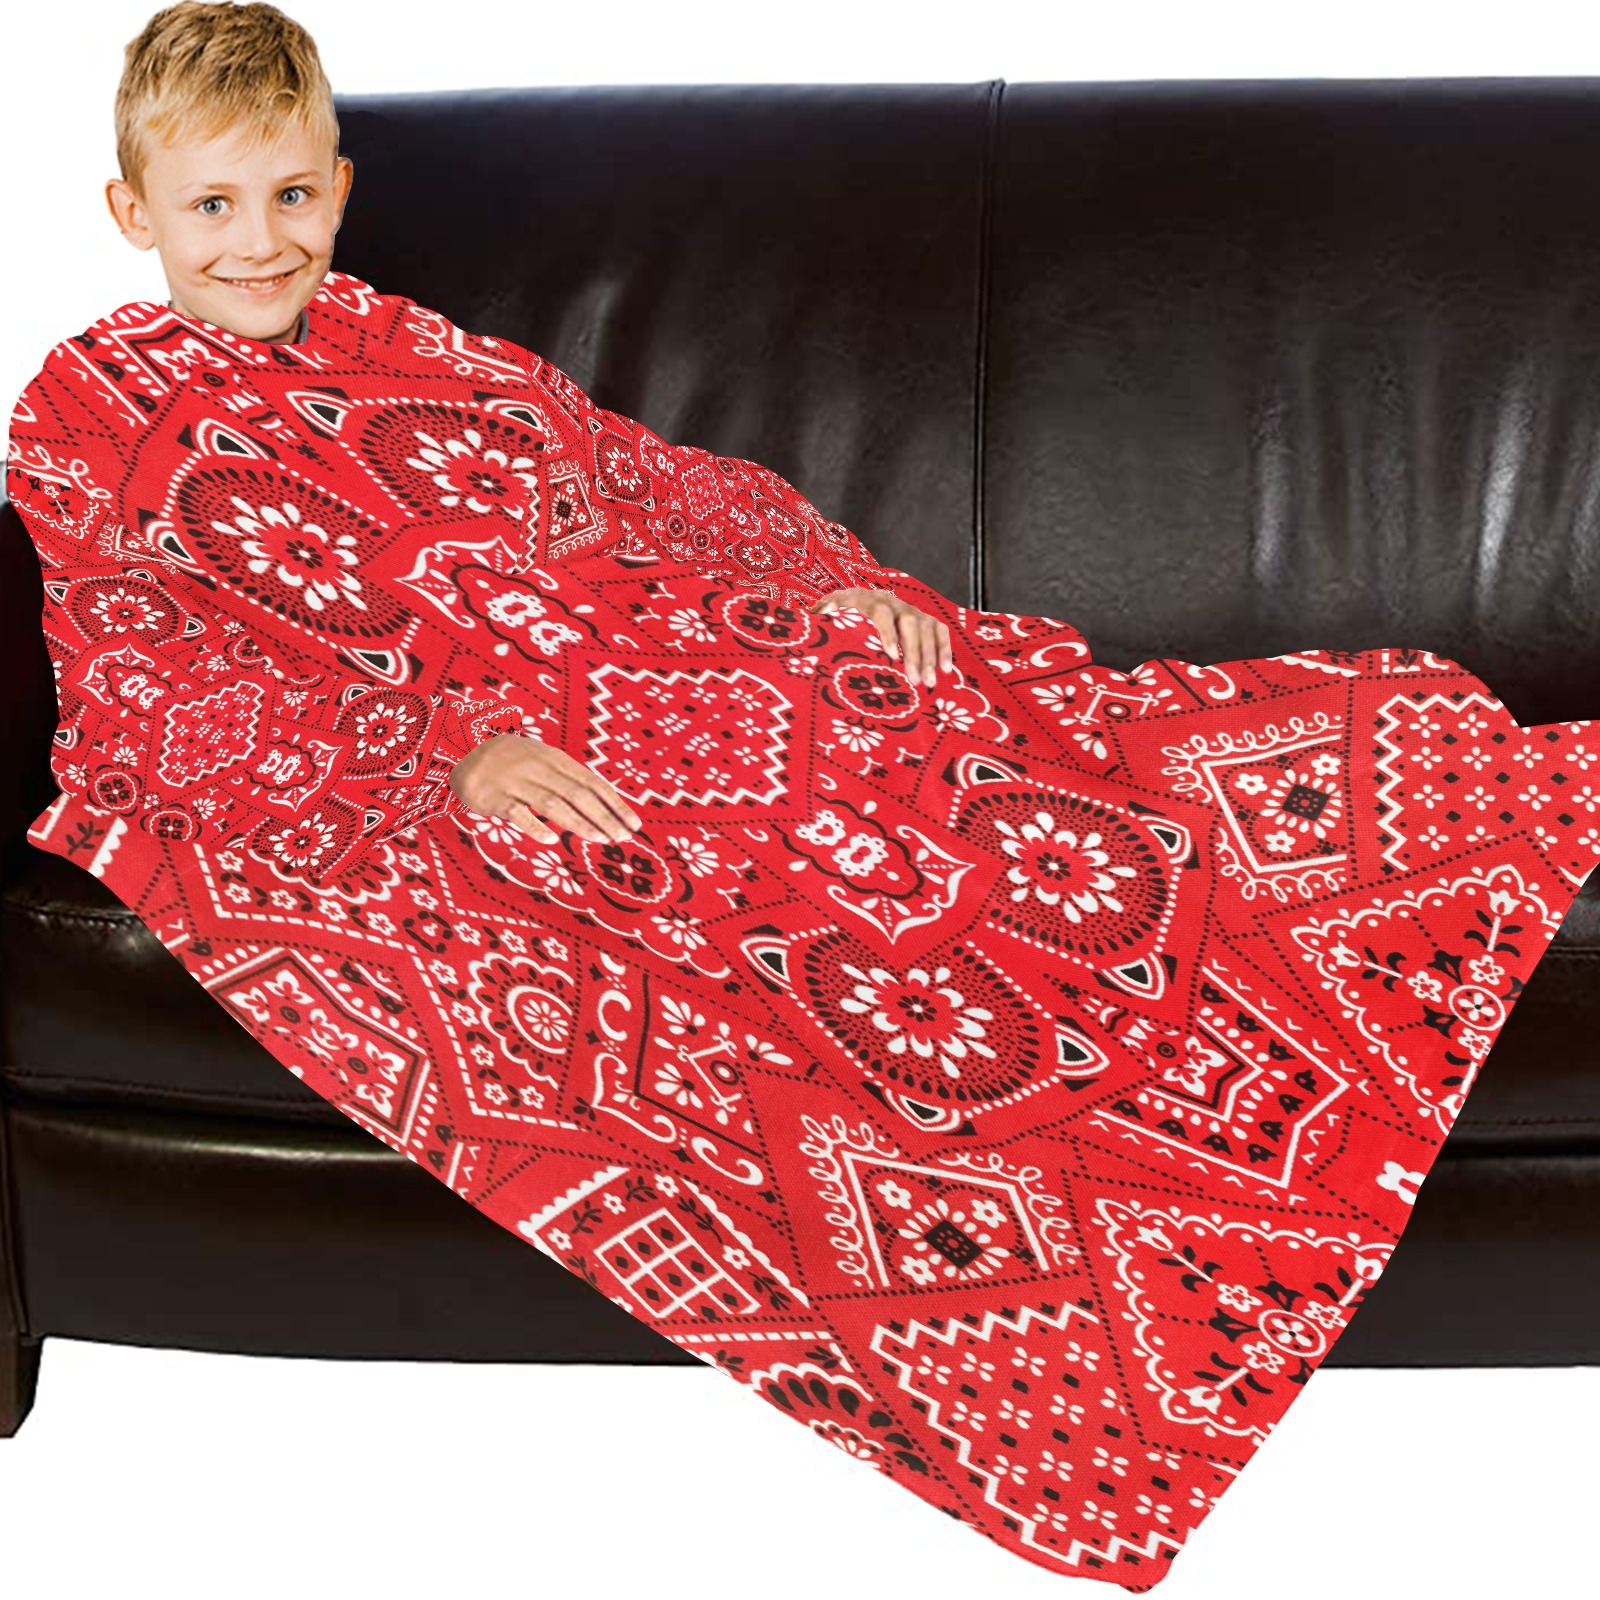 Red Bandana Squares Blanket Robe with Sleeves for Kids